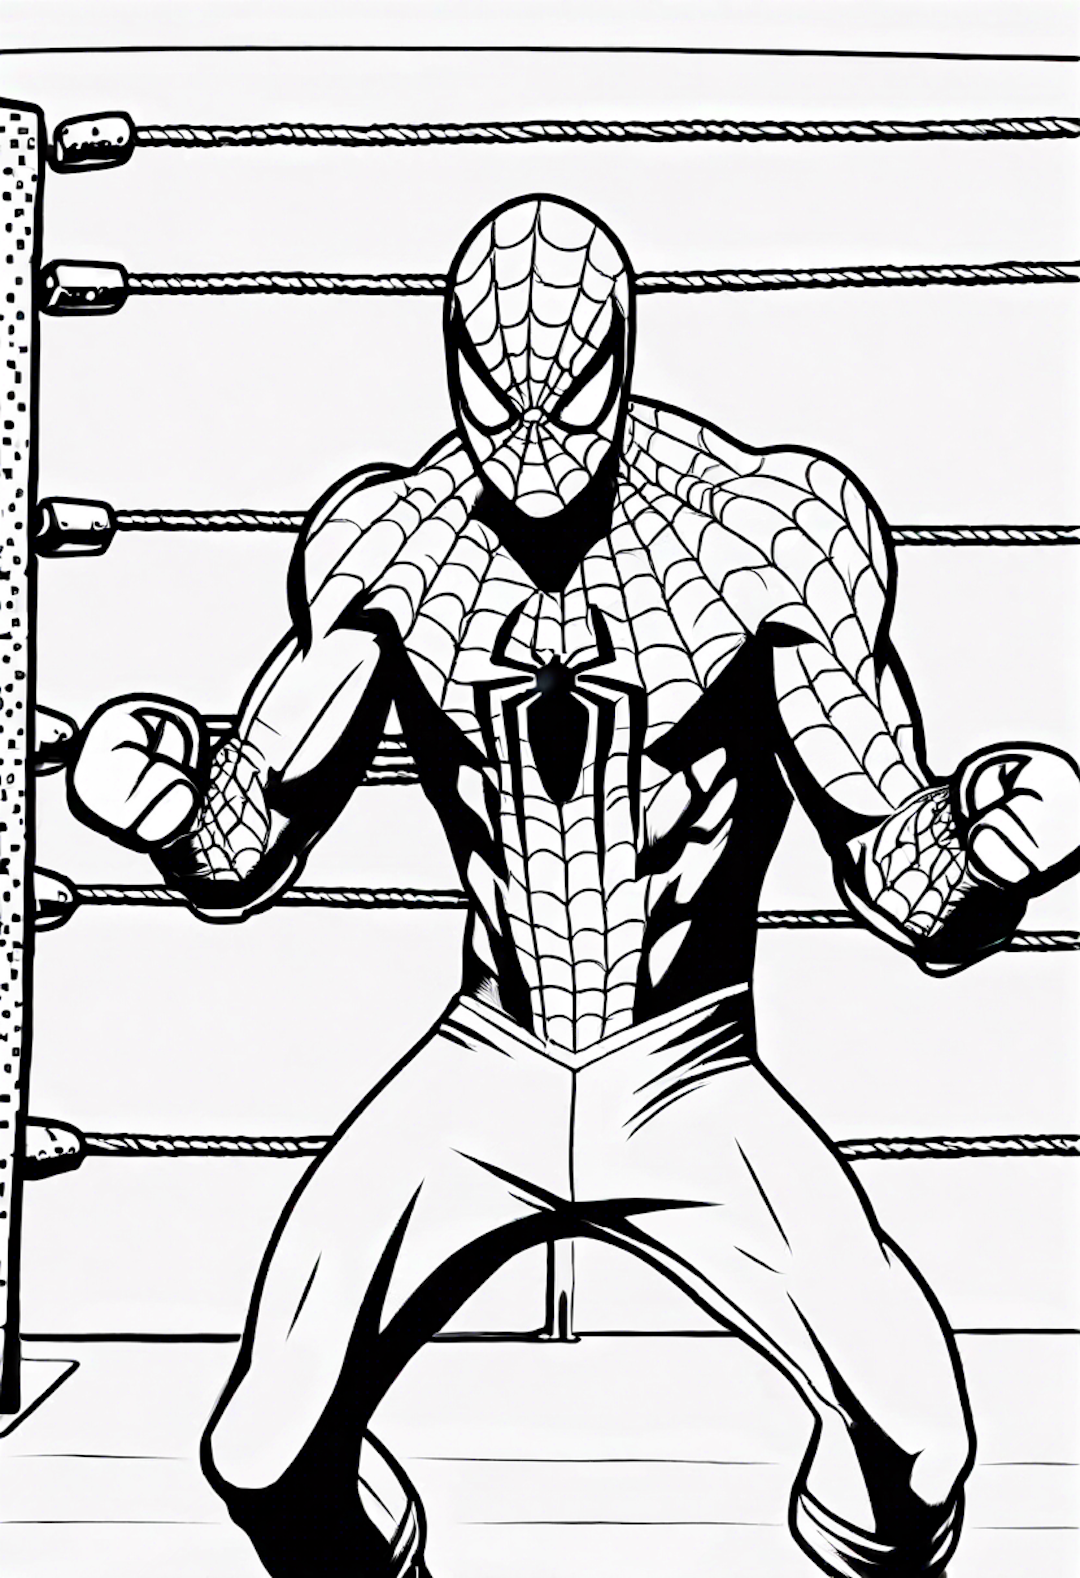 Spiderman In A Face Off With Kingpin In A Boxing Ring